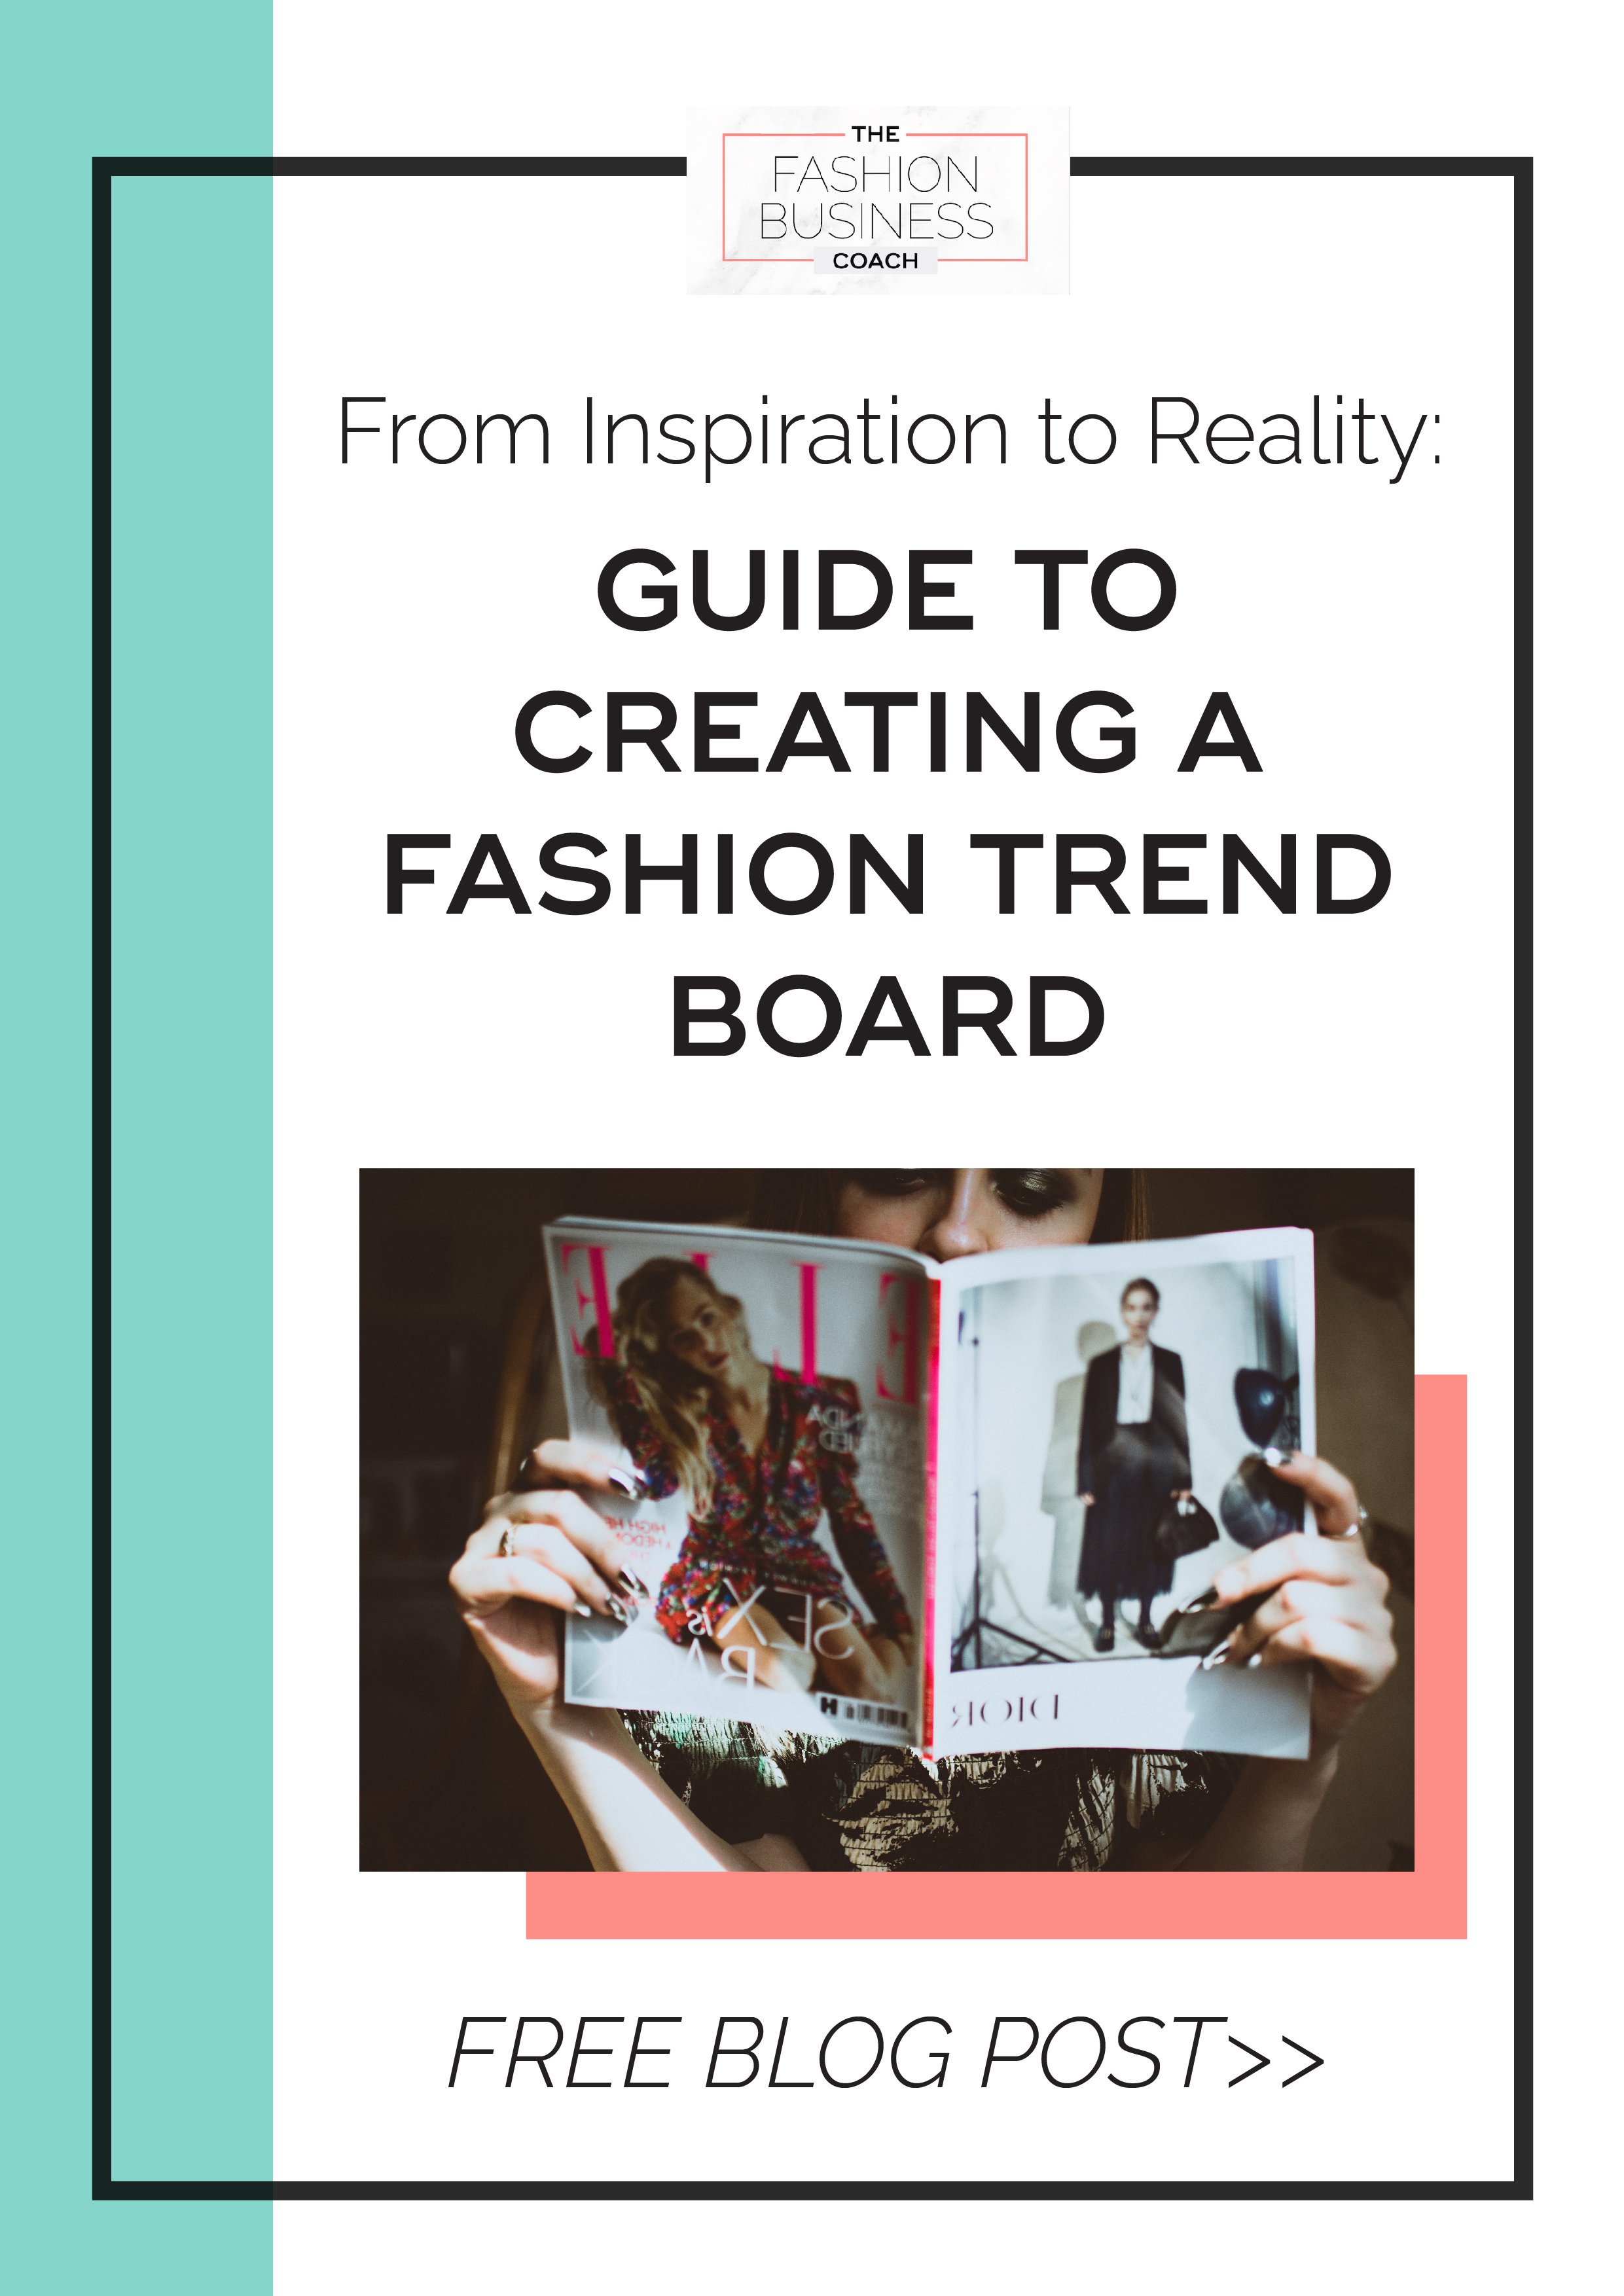 Pinterest_From Inspiration to Reality- Guide to Creating a Fashion Trend Board 1.jpg